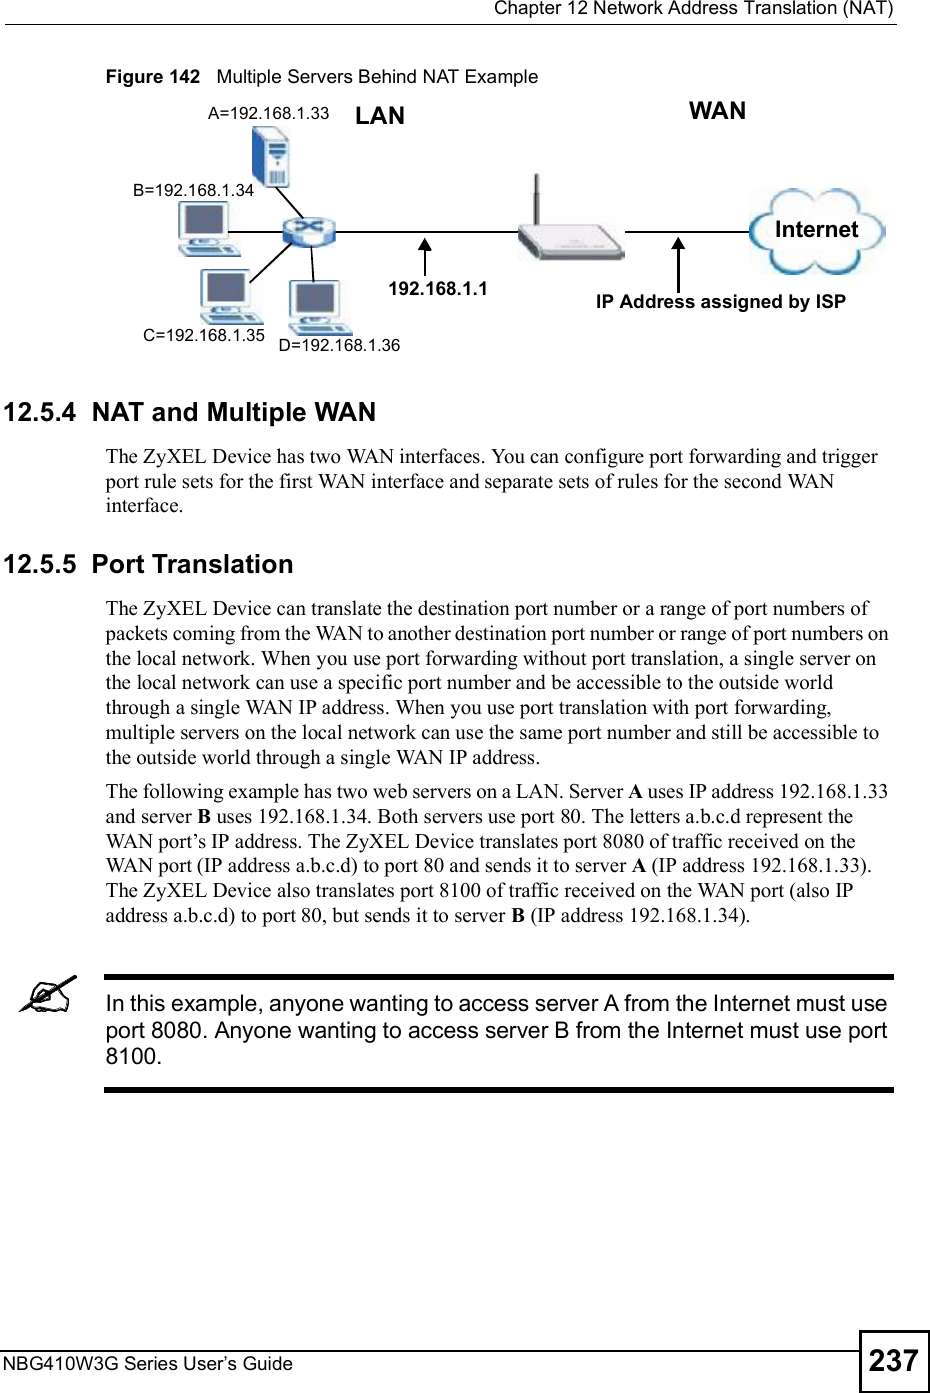  Chapter 12Network Address Translation (NAT)NBG410W3G Series User s Guide 237Figure 142   Multiple Servers Behind NAT Example12.5.4  NAT and Multiple WANThe ZyXEL Device has two WAN interfaces. You can configure port forwarding and trigger port rule sets for the first WAN interface and separate sets of rules for the second WAN interface. 12.5.5  Port TranslationThe ZyXEL Device can translate the destination port number or a range of port numbers of packets coming from the WAN to another destination port number or range of port numbers on the local network. When you use port forwarding without port translation, a single server on the local network can use a specific port number and be accessible to the outside world through a single WAN IP address. When you use port translation with port forwarding, multiple servers on the local network can use the same port number and still be accessible to the outside world through a single WAN IP address.The following example has two web servers on a LAN. Server A uses IP address 192.168.1.33 and server B uses 192.168.1.34. Both servers use port 80. The letters a.b.c.d represent the WAN port!s IP address. The ZyXEL Device translates port 8080 of traffic received on the WAN port (IP address a.b.c.d) to port 80 and sends it to server A (IP address 192.168.1.33). The ZyXEL Device also translates port 8100 of traffic received on the WAN port (also IP address a.b.c.d) to port 80, but sends it to server B (IP address 192.168.1.34). In this example, anyone wanting to access server A from the Internet must use port 8080. Anyone wanting to access server B from the Internet must use port 8100.A=192.168.1.33D=192.168.1.36C=192.168.1.35B=192.168.1.34InternetWANLAN192.168.1.1 IP Address assigned by ISP